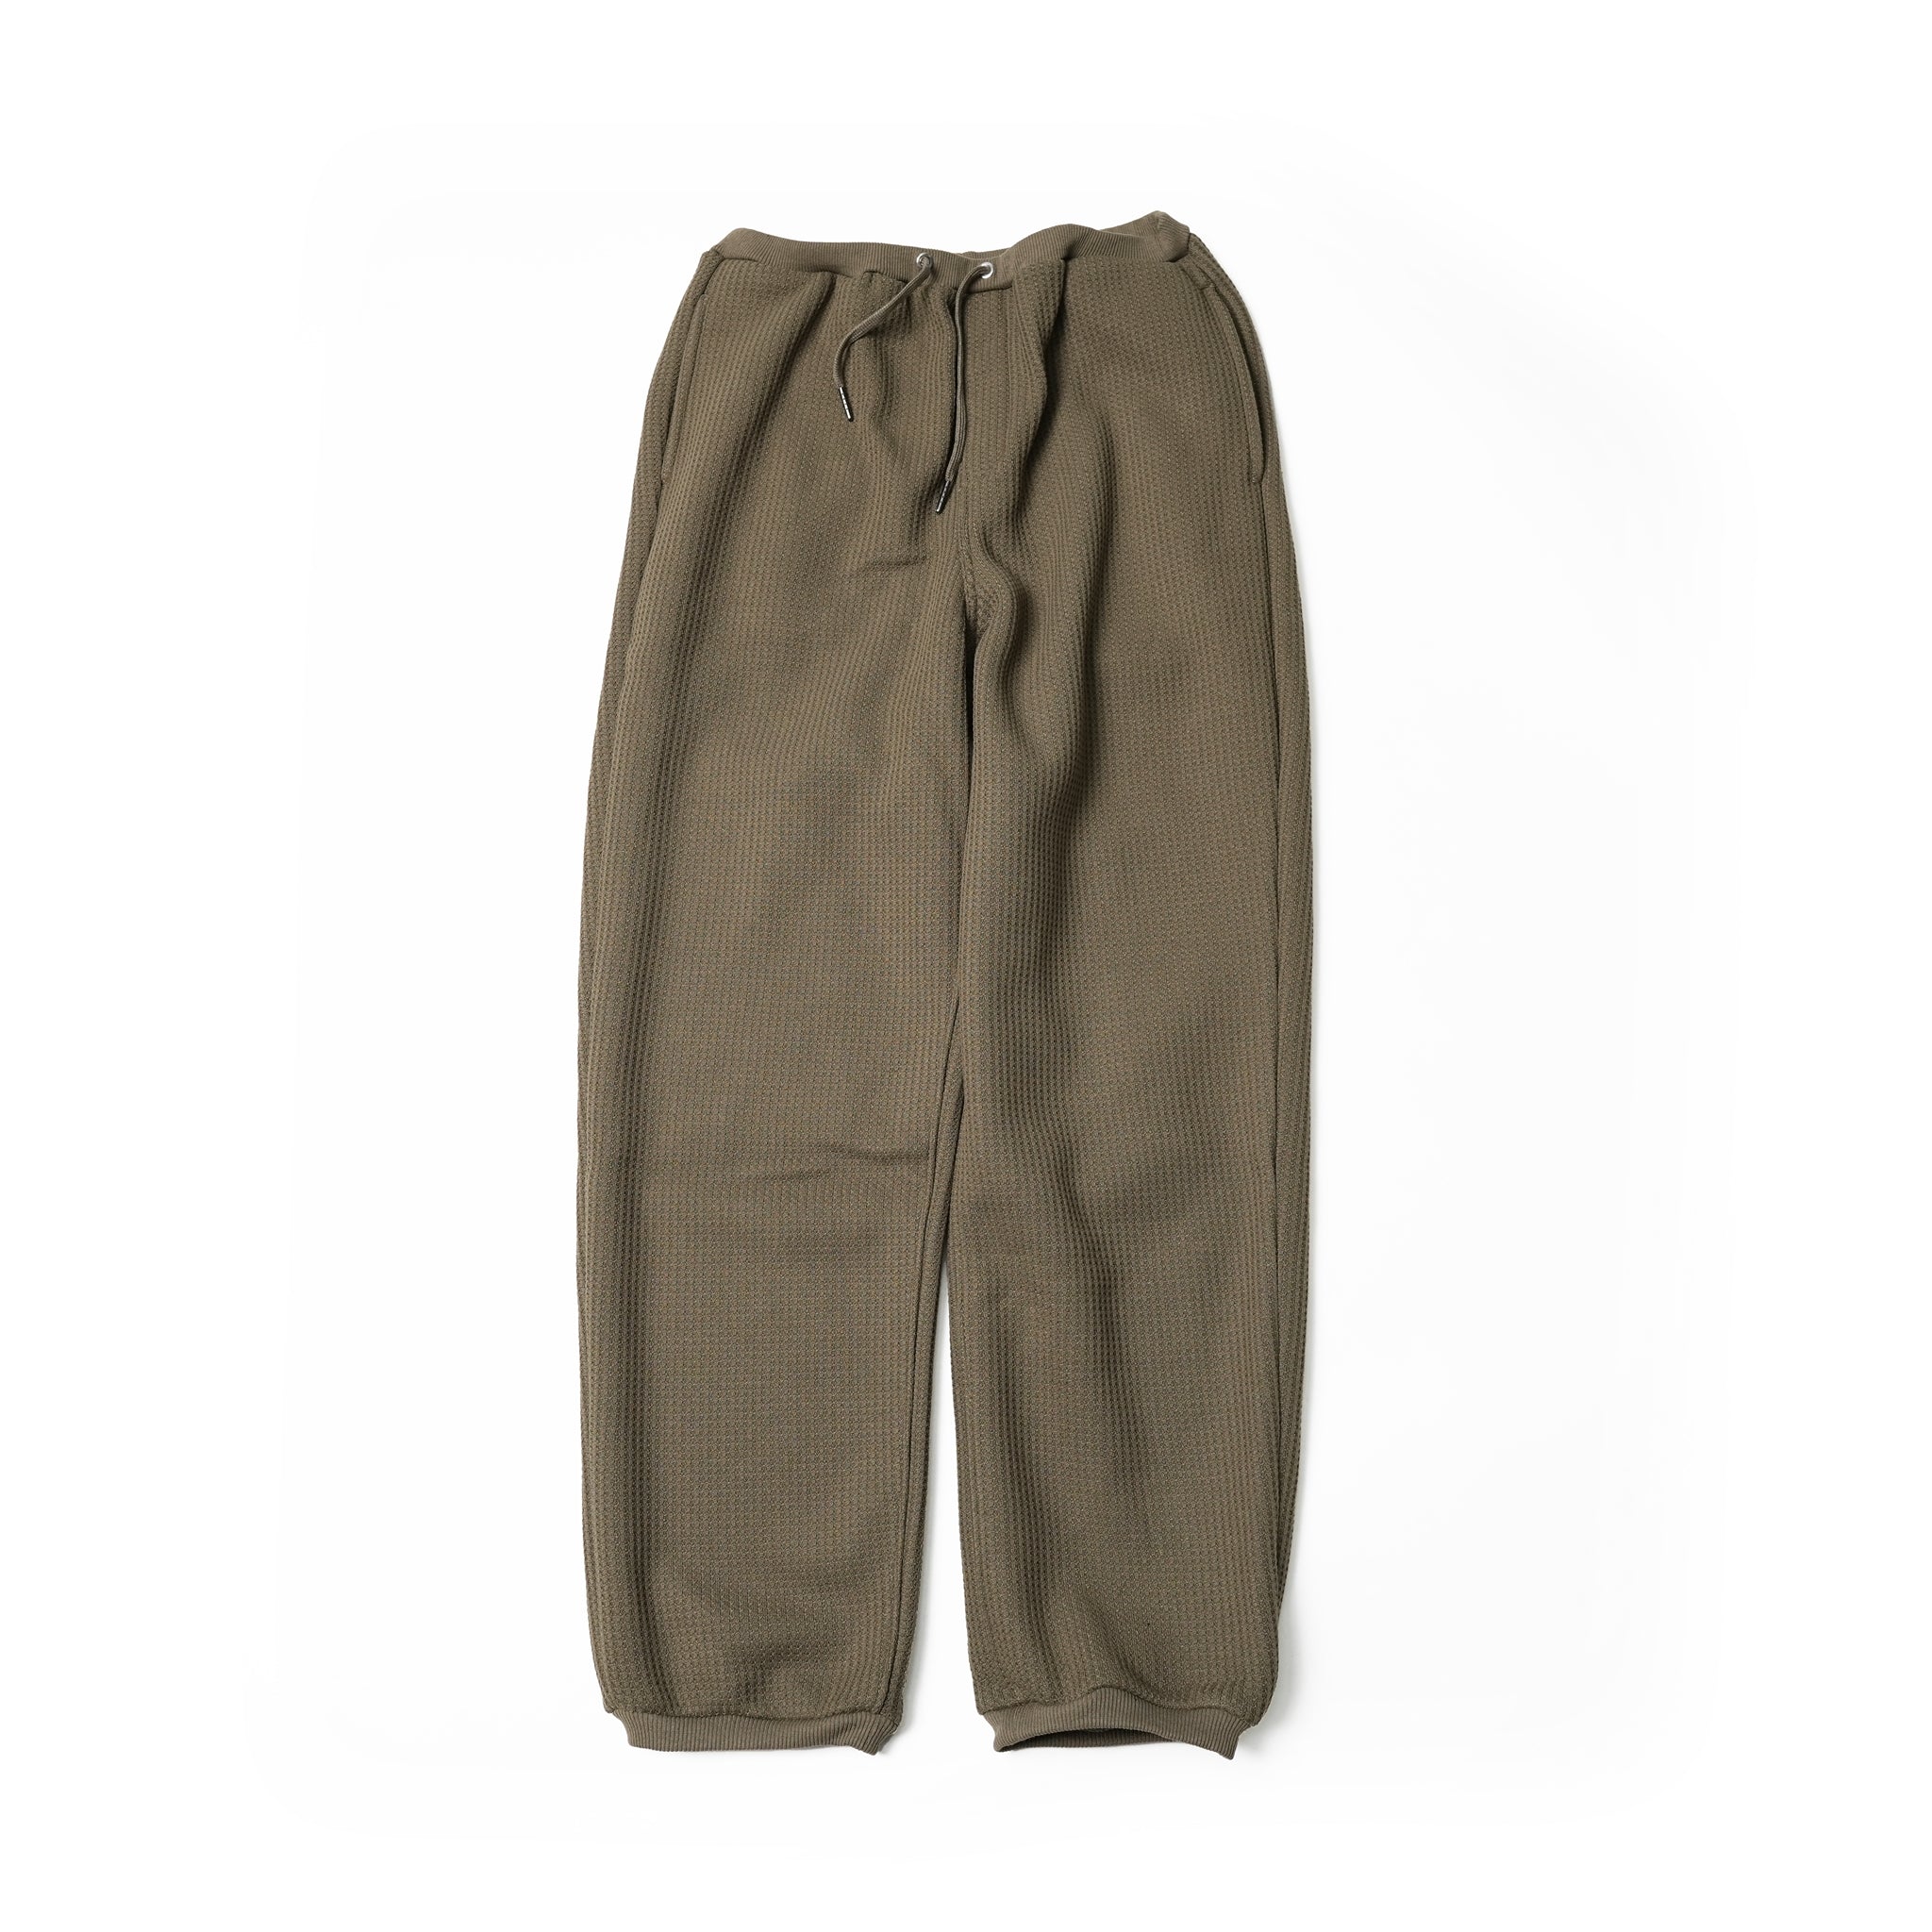 No:P0433307_2023aw | Name:SUNNY EASY PANTS | Color:Black/Olive | Size:M/L 【NASNGWAM_ナスングワム】